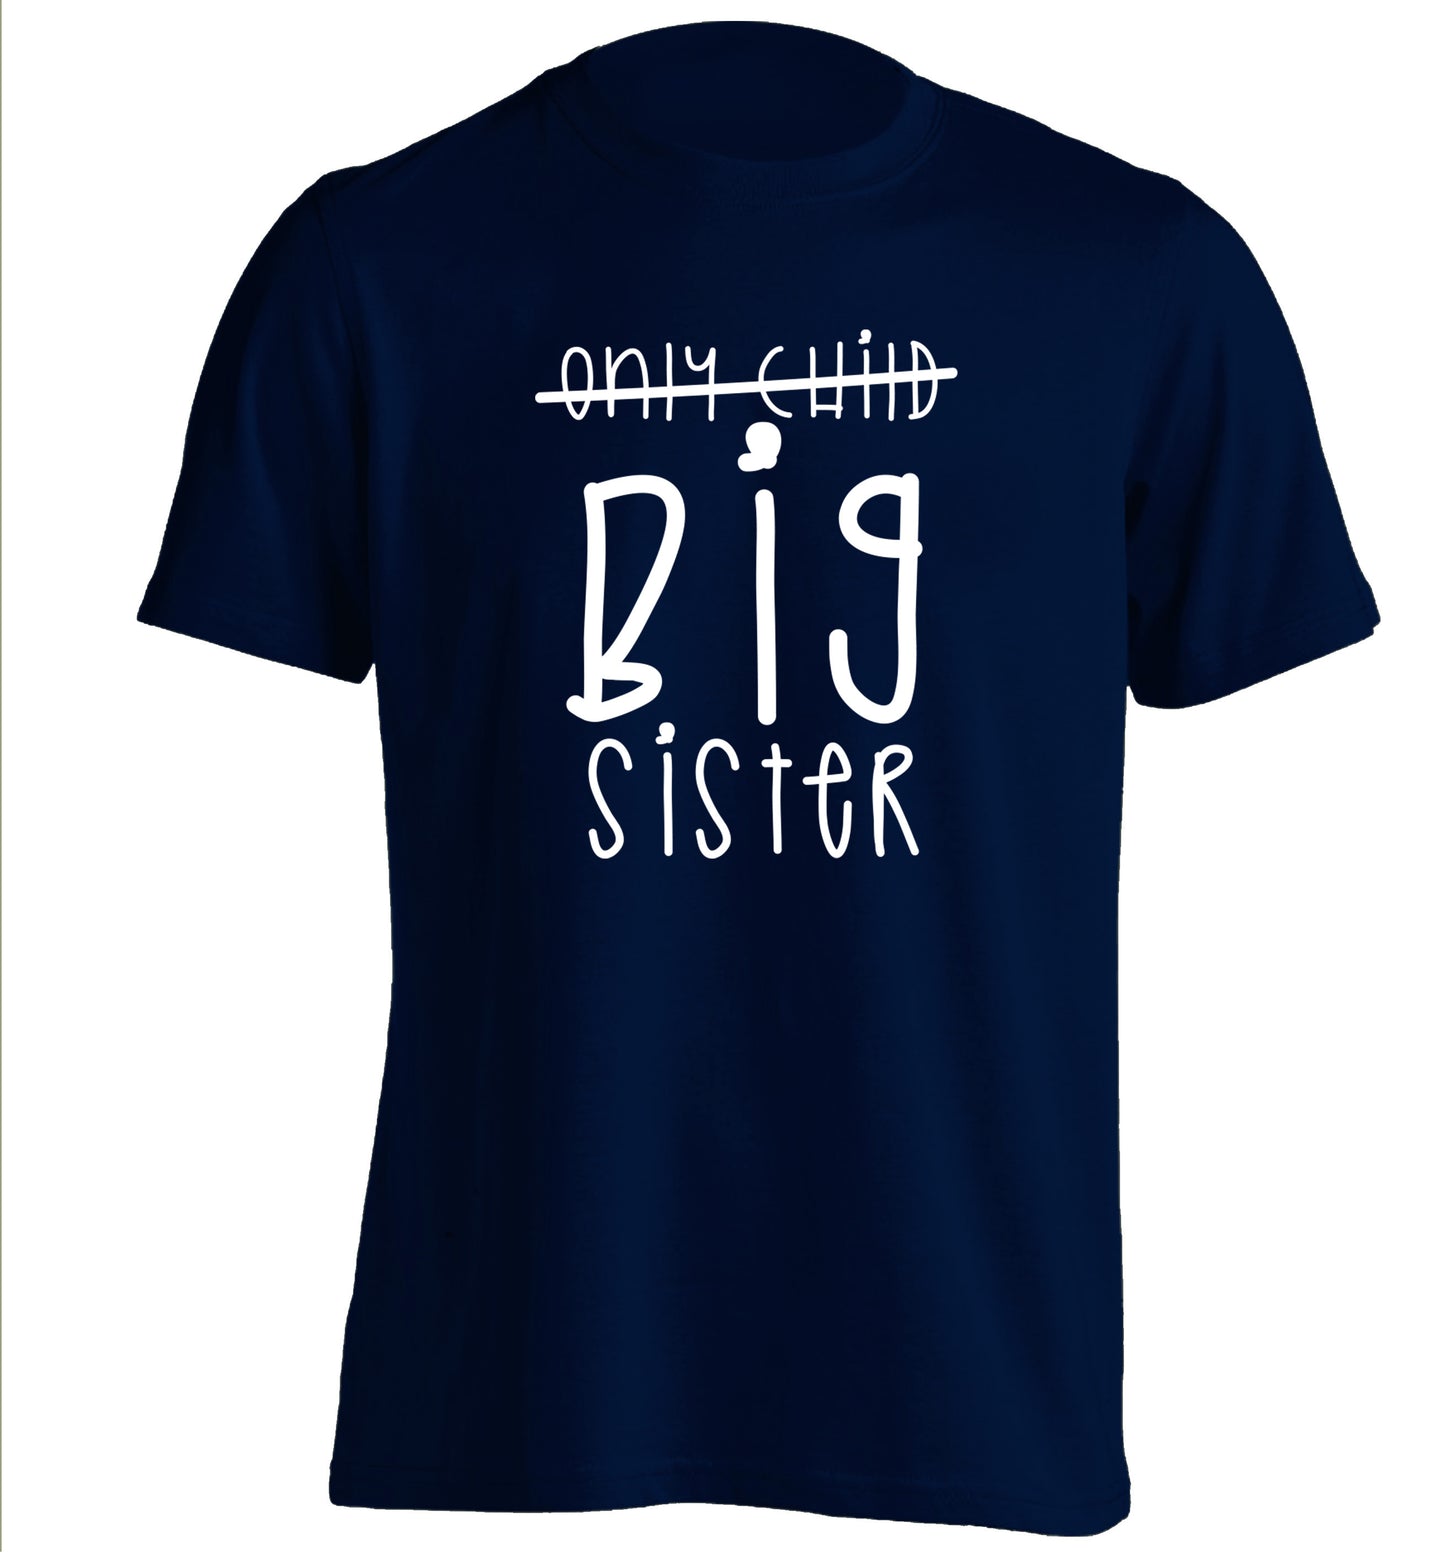 Only child big sister adults unisex navy Tshirt 2XL